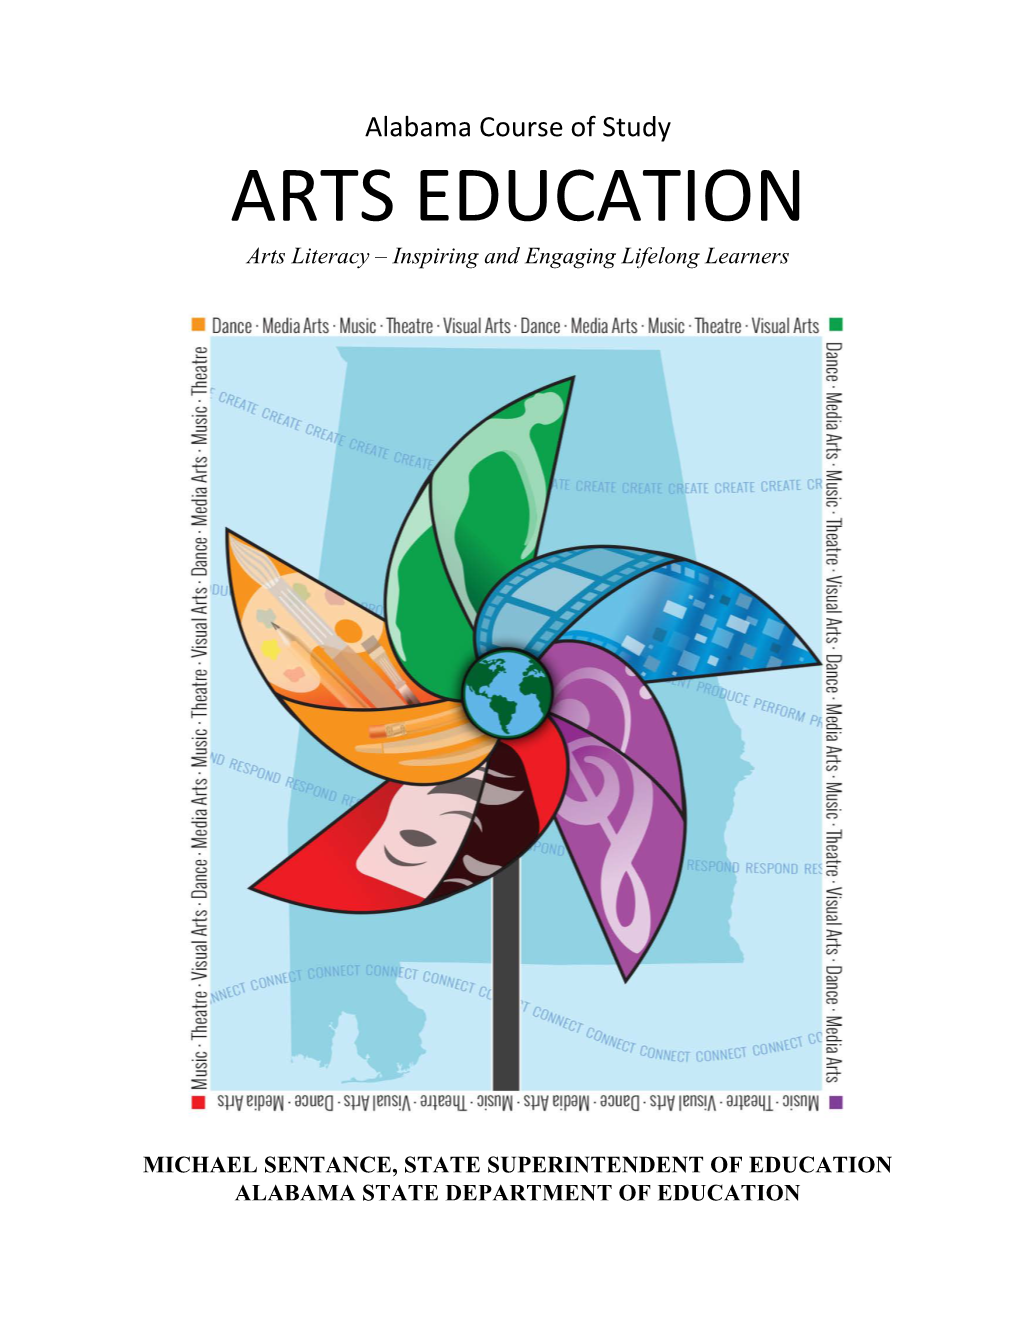 Alabama Course of Study in Arts Education